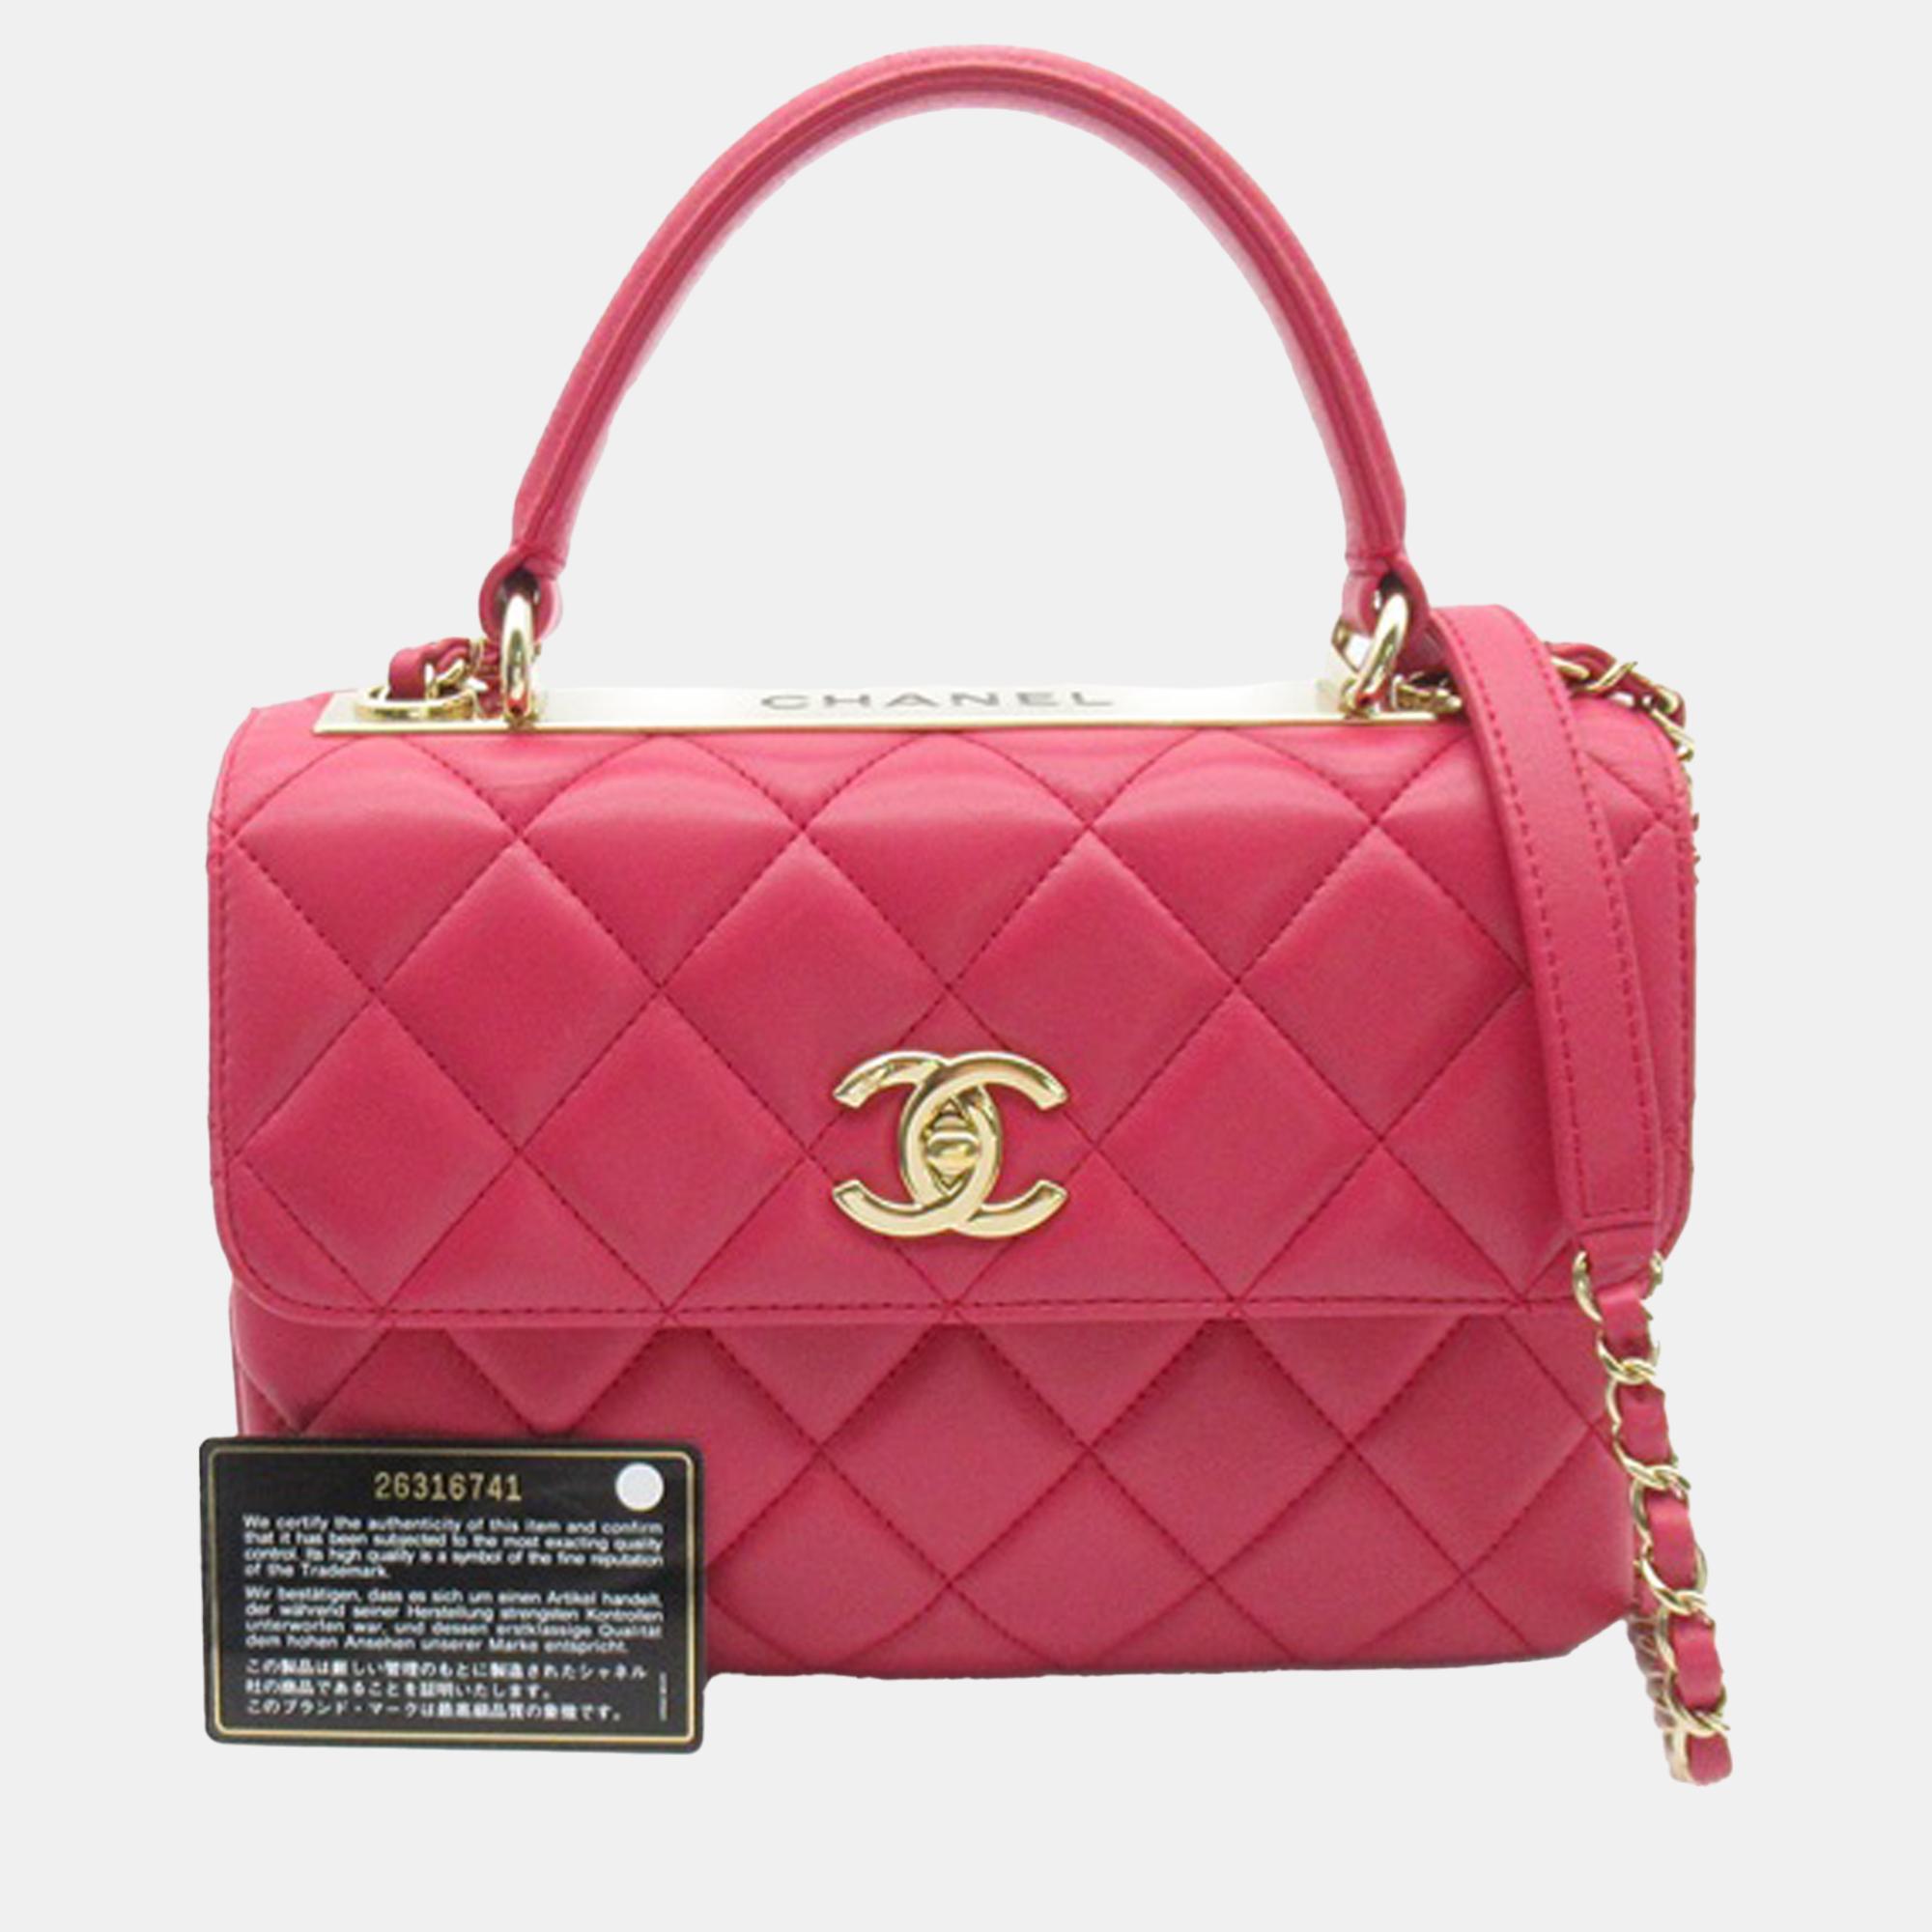 Chanel Red Small Trendy CC Lambskin Flap